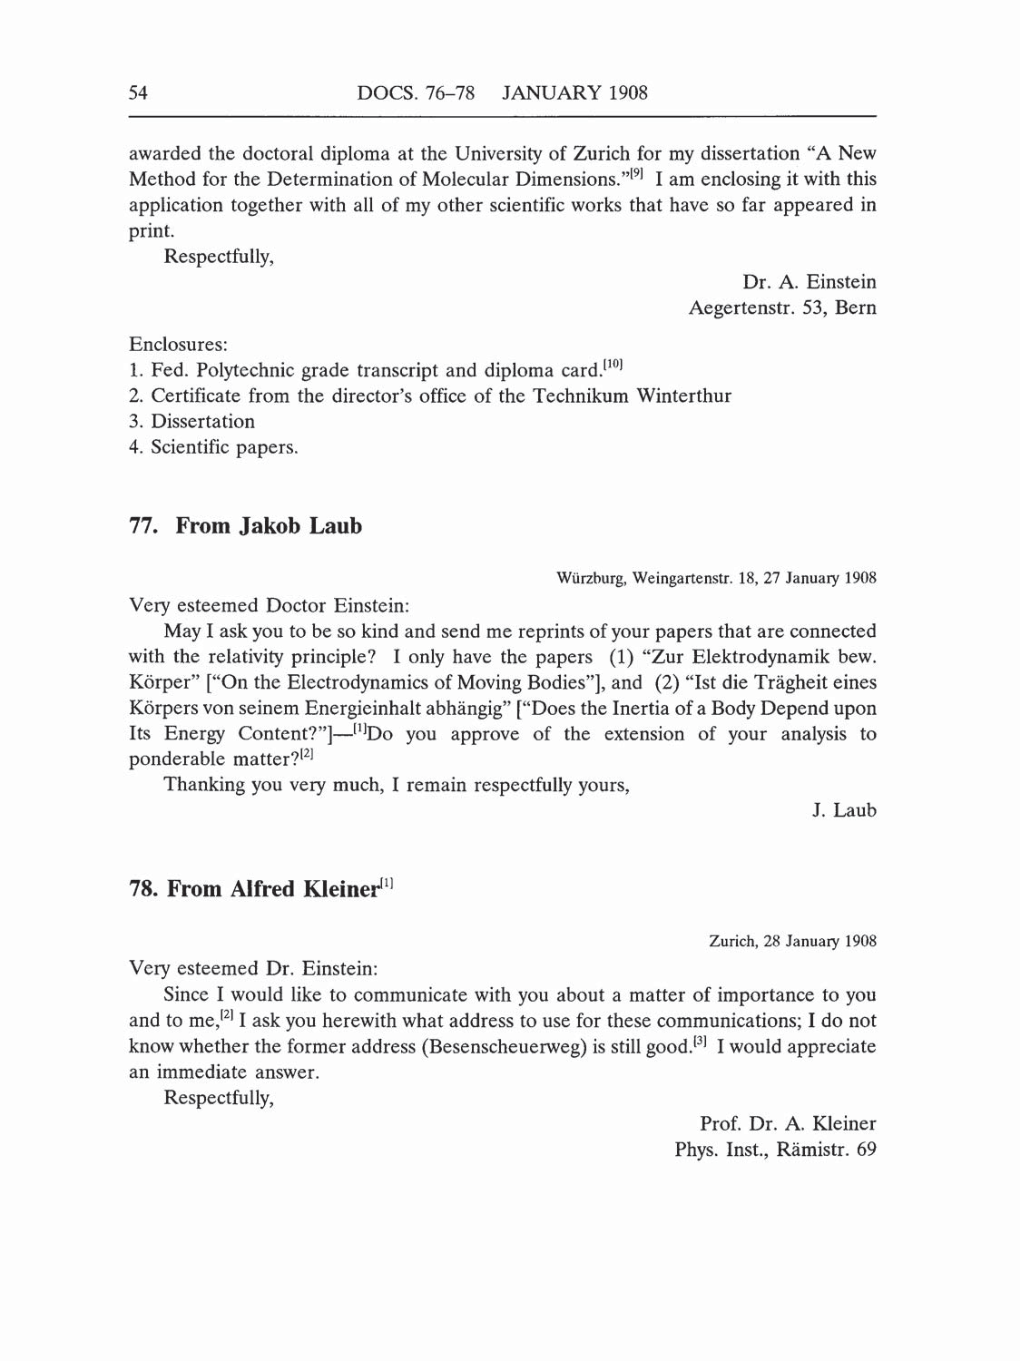 Volume 5: The Swiss Years: Correspondence, 1902-1914 (English translation supplement) page 54